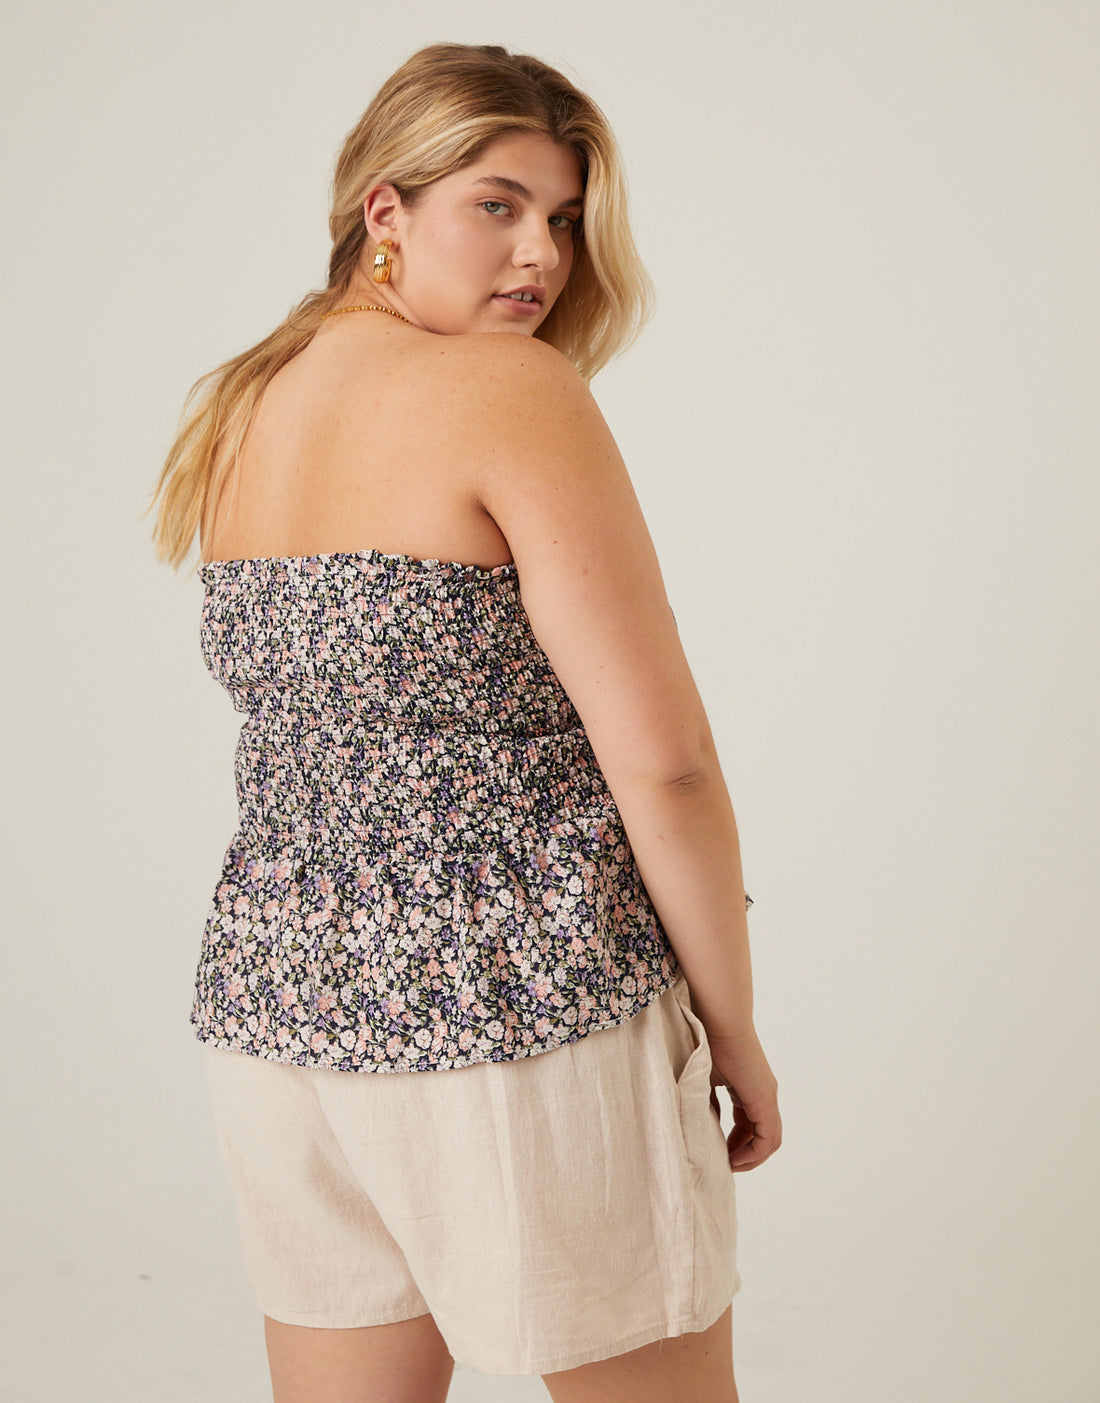 Curve Strapless Buttoned Floral Top Plus Size Tops -2020AVE